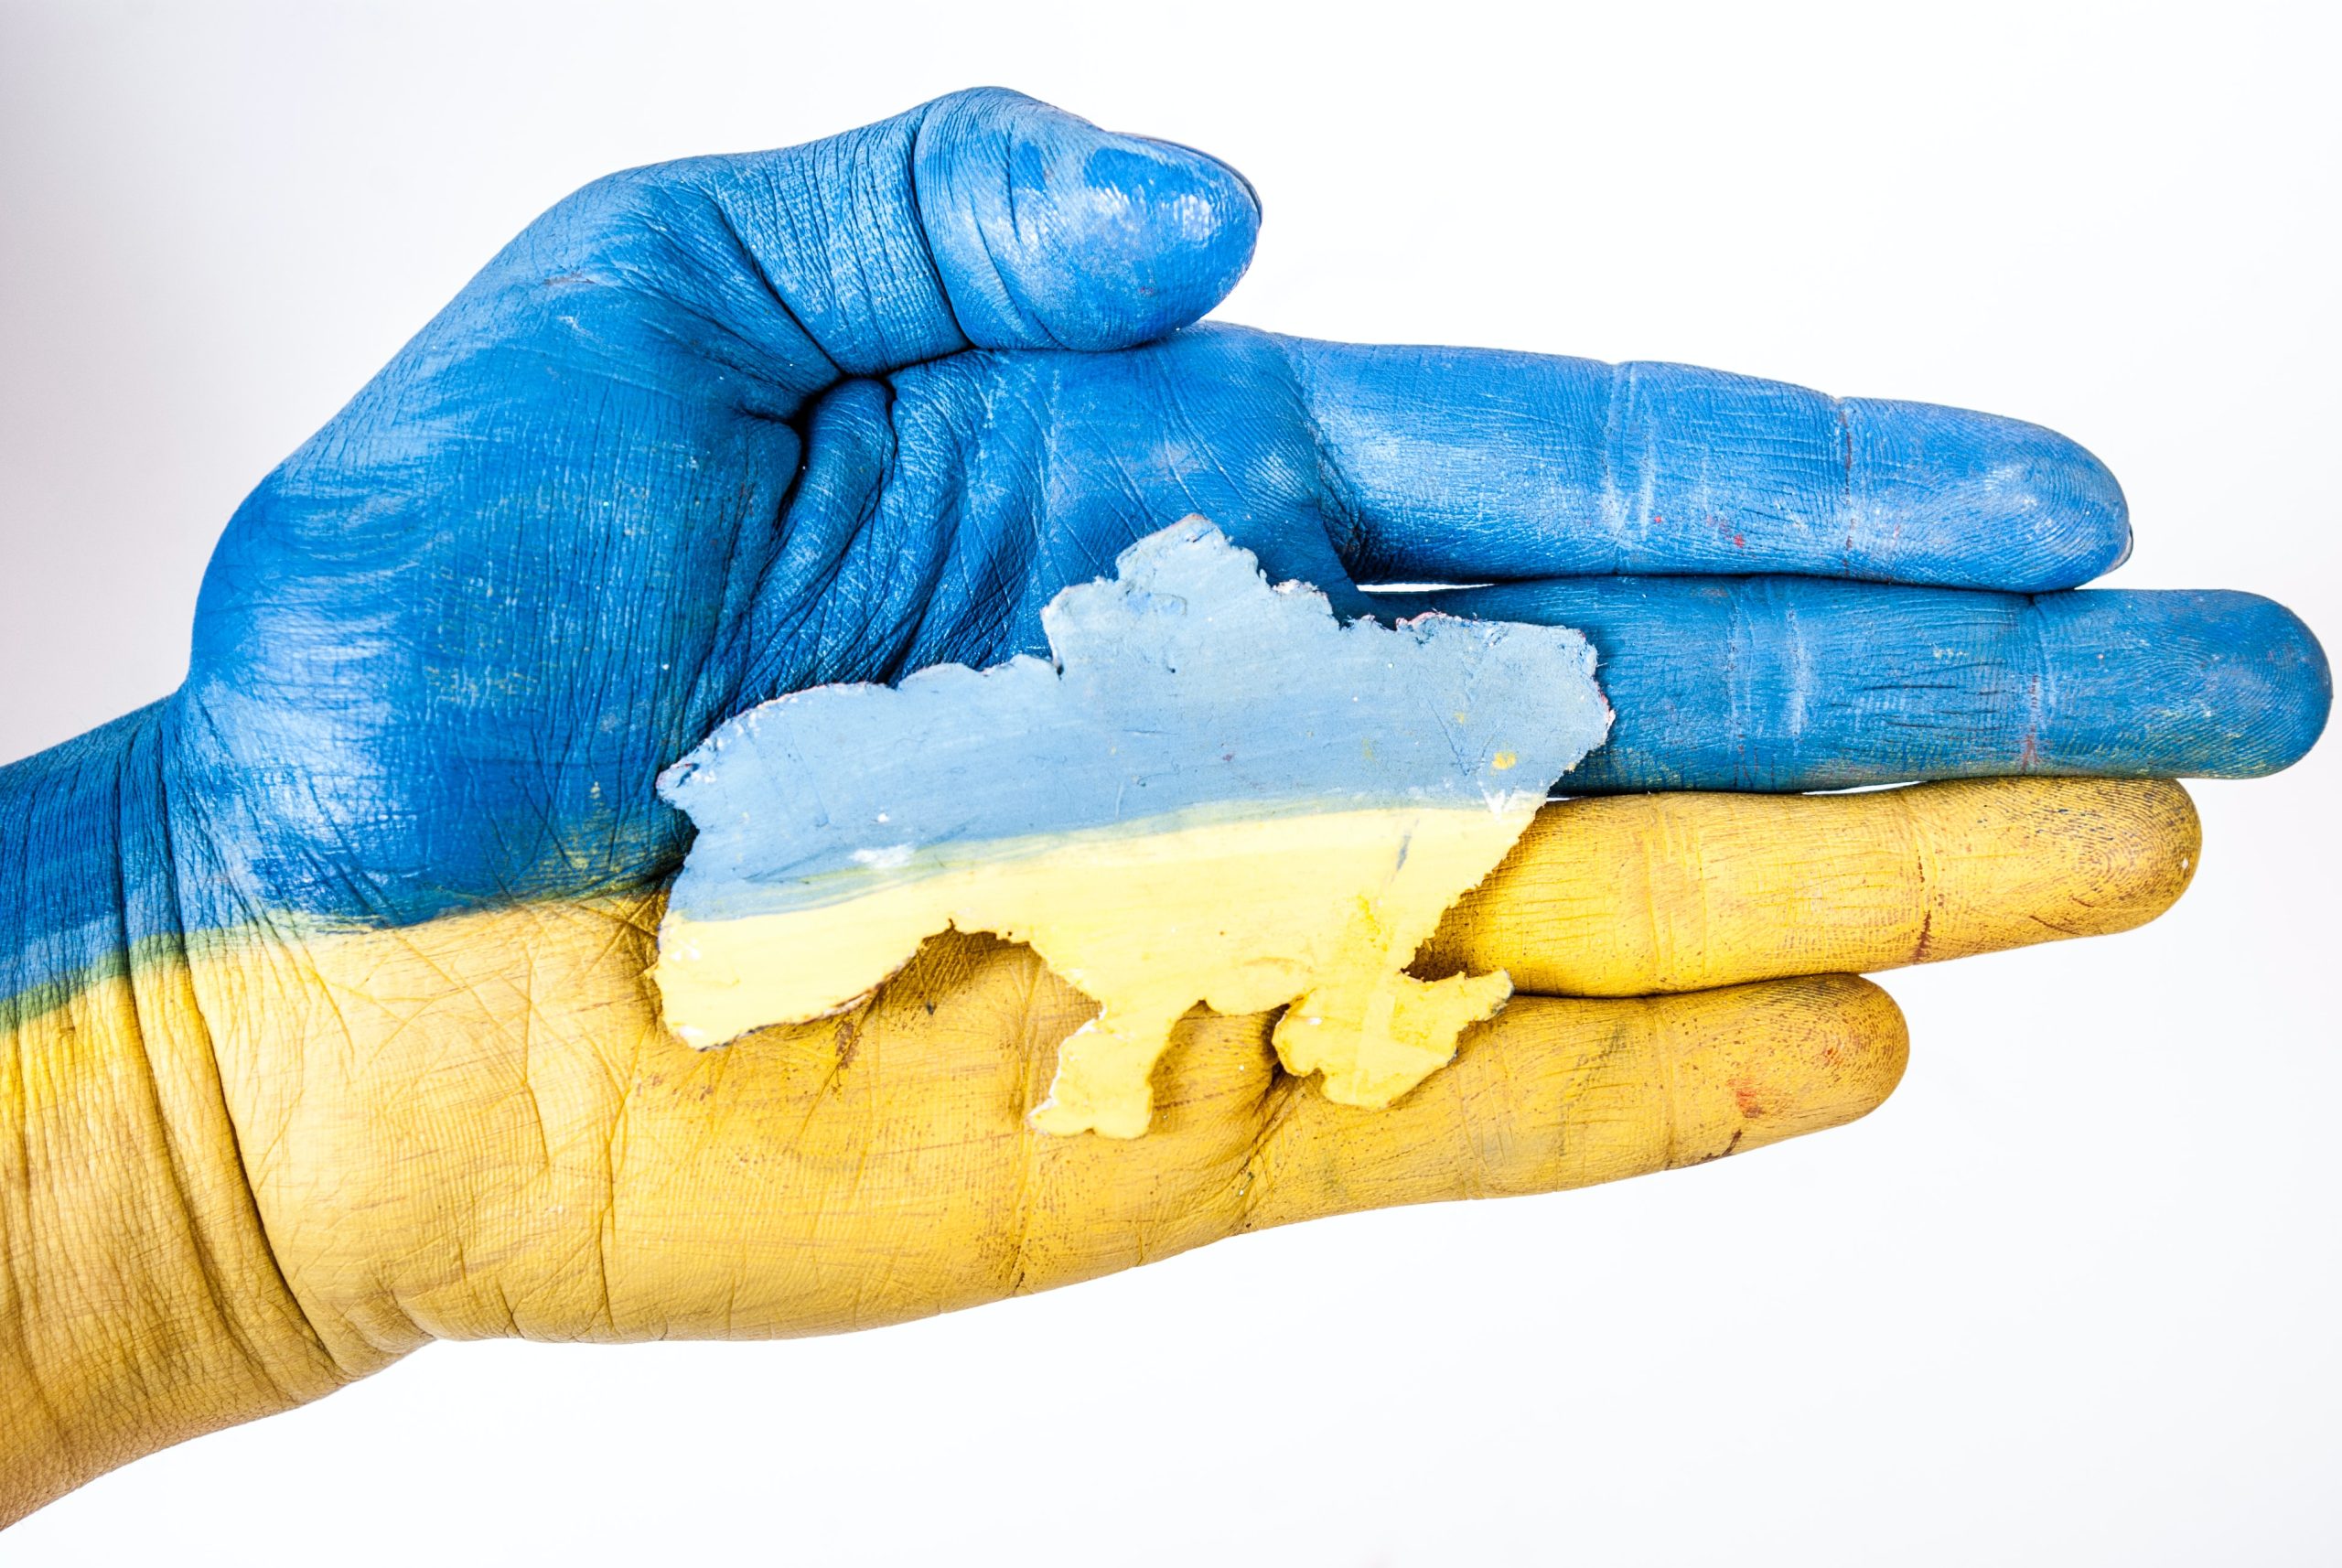 A hand painted blue and yellow representing Ukrainian flag